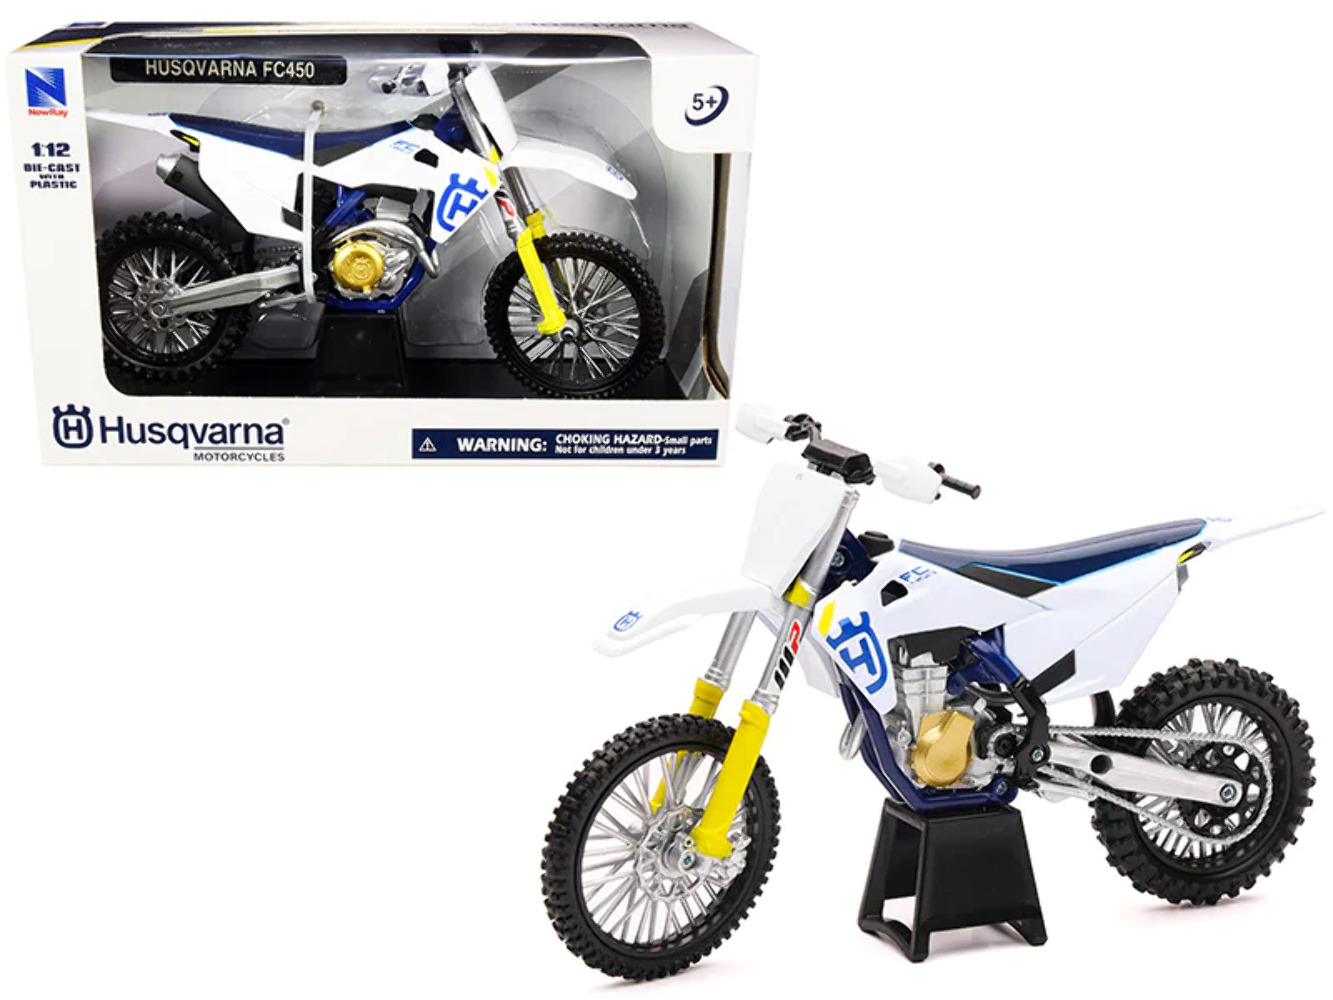 Husqvarna FC450 White and Blue 1/12 Diecast Motorcycle Model